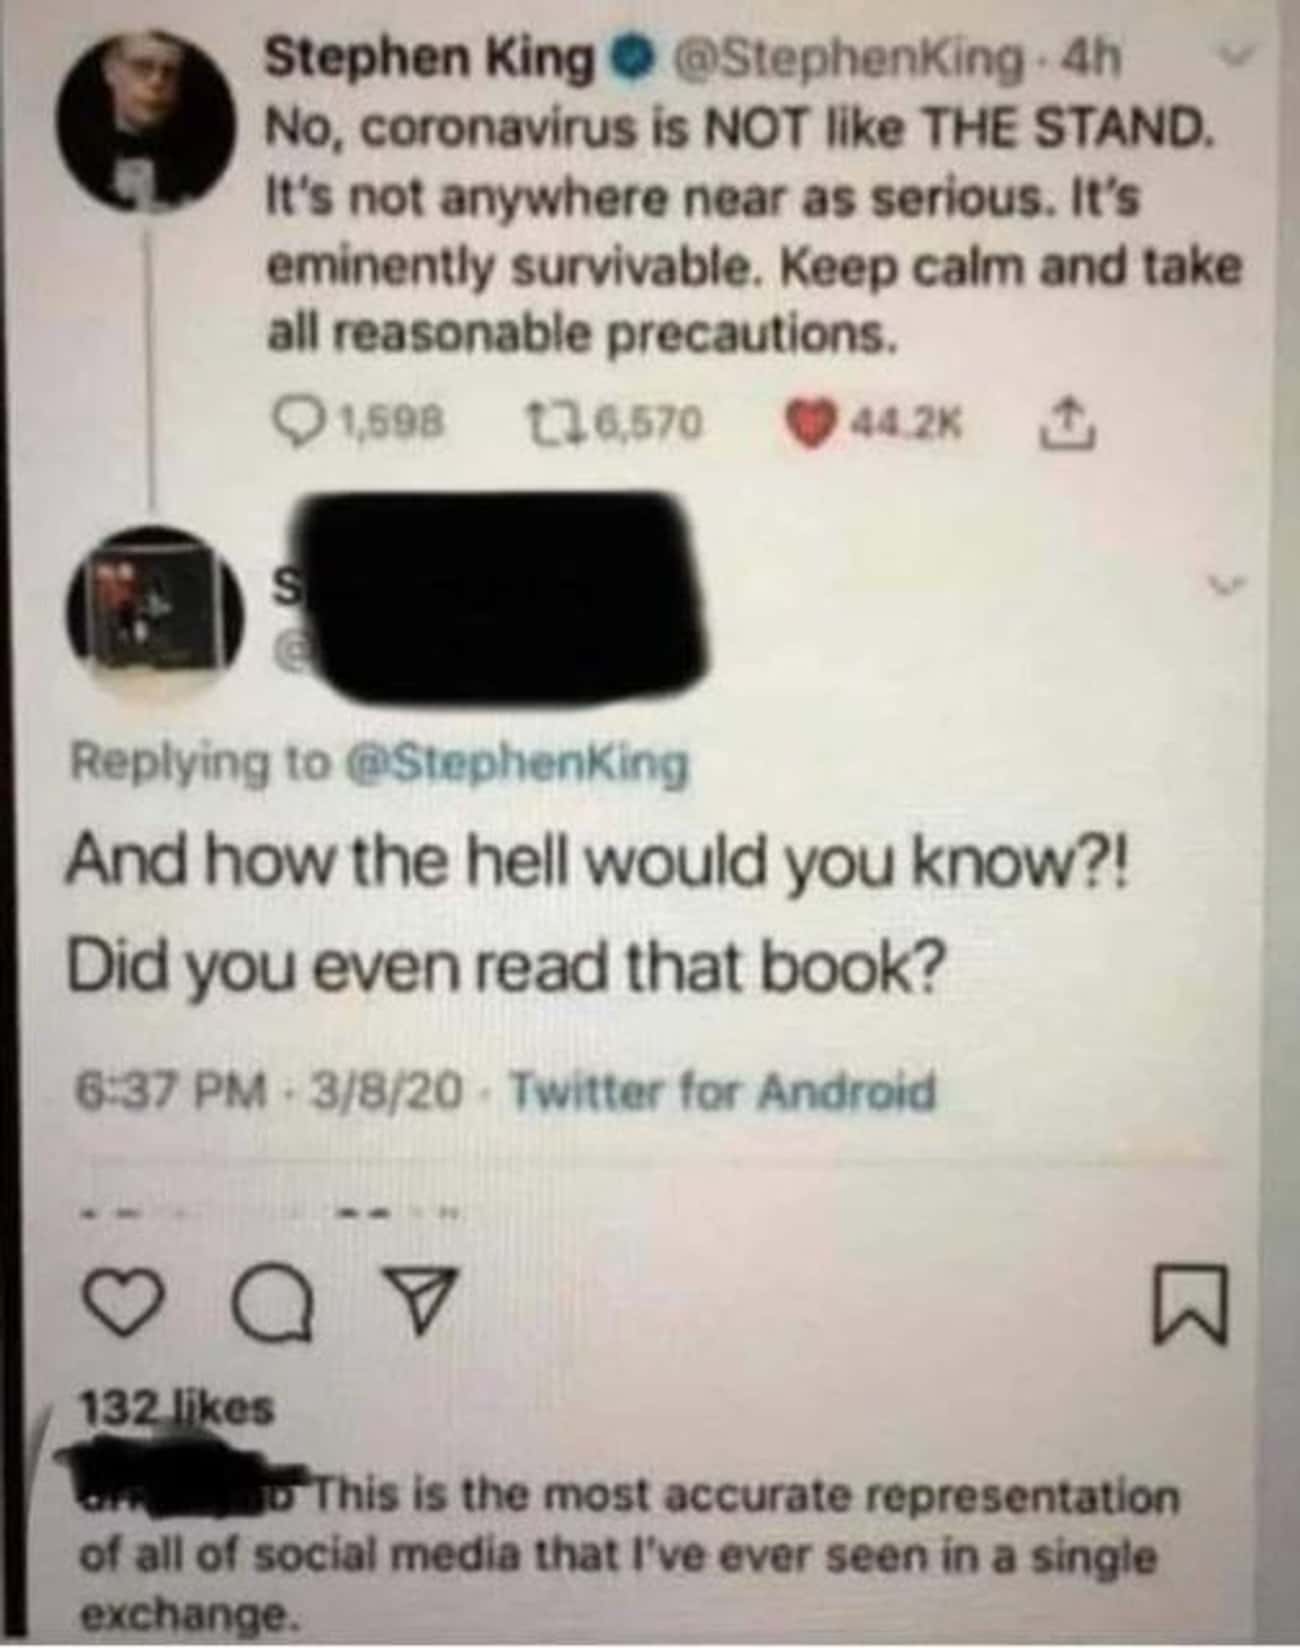 Did He Even Read The Book That He Wrote?